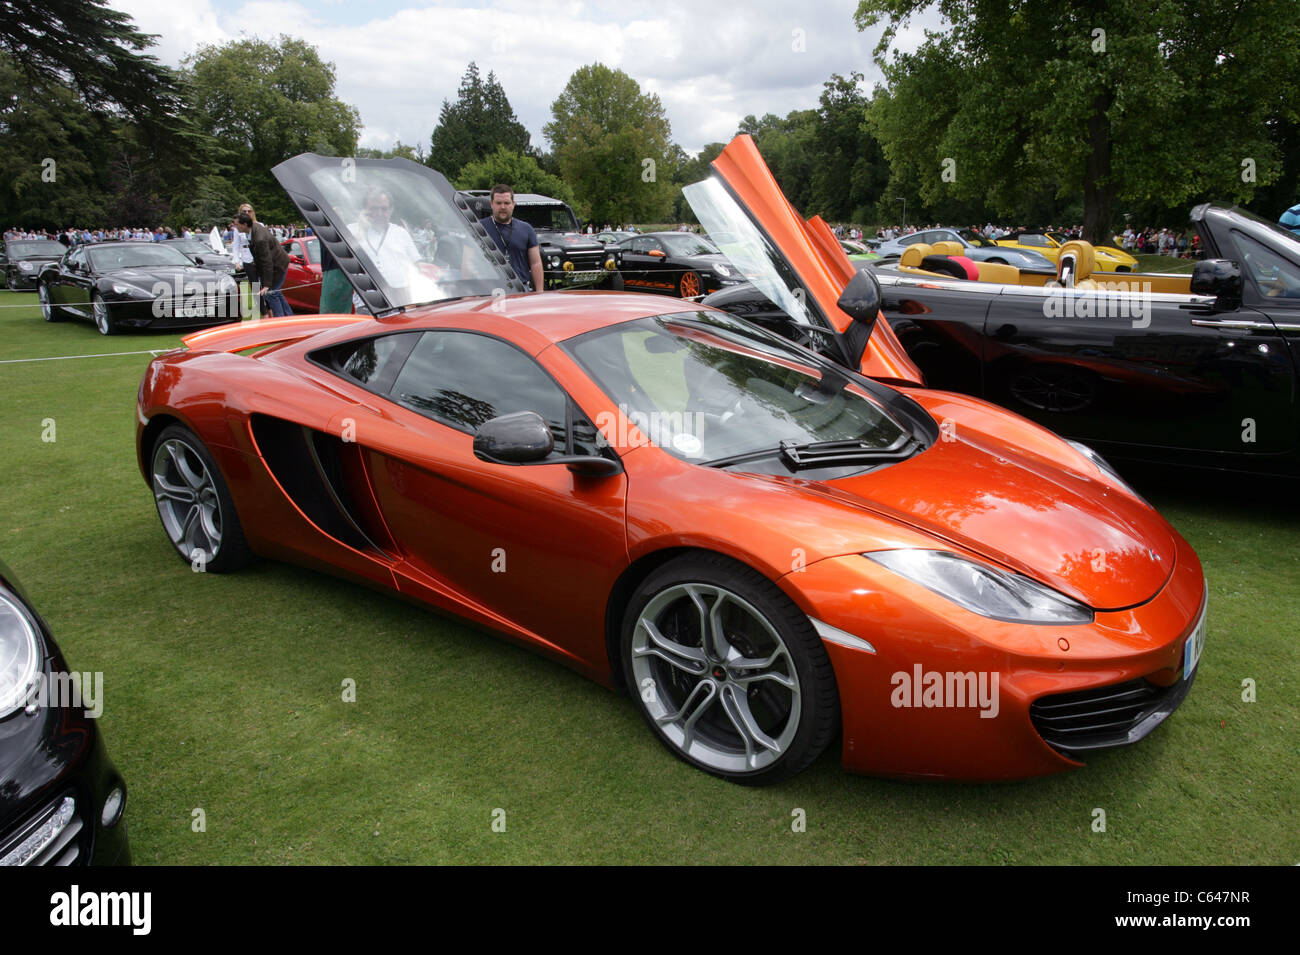 McClaren MP4 on show at Wilton Classic and Sportscar event in Wilton, Wiltshire, England 2011 Stock Photo